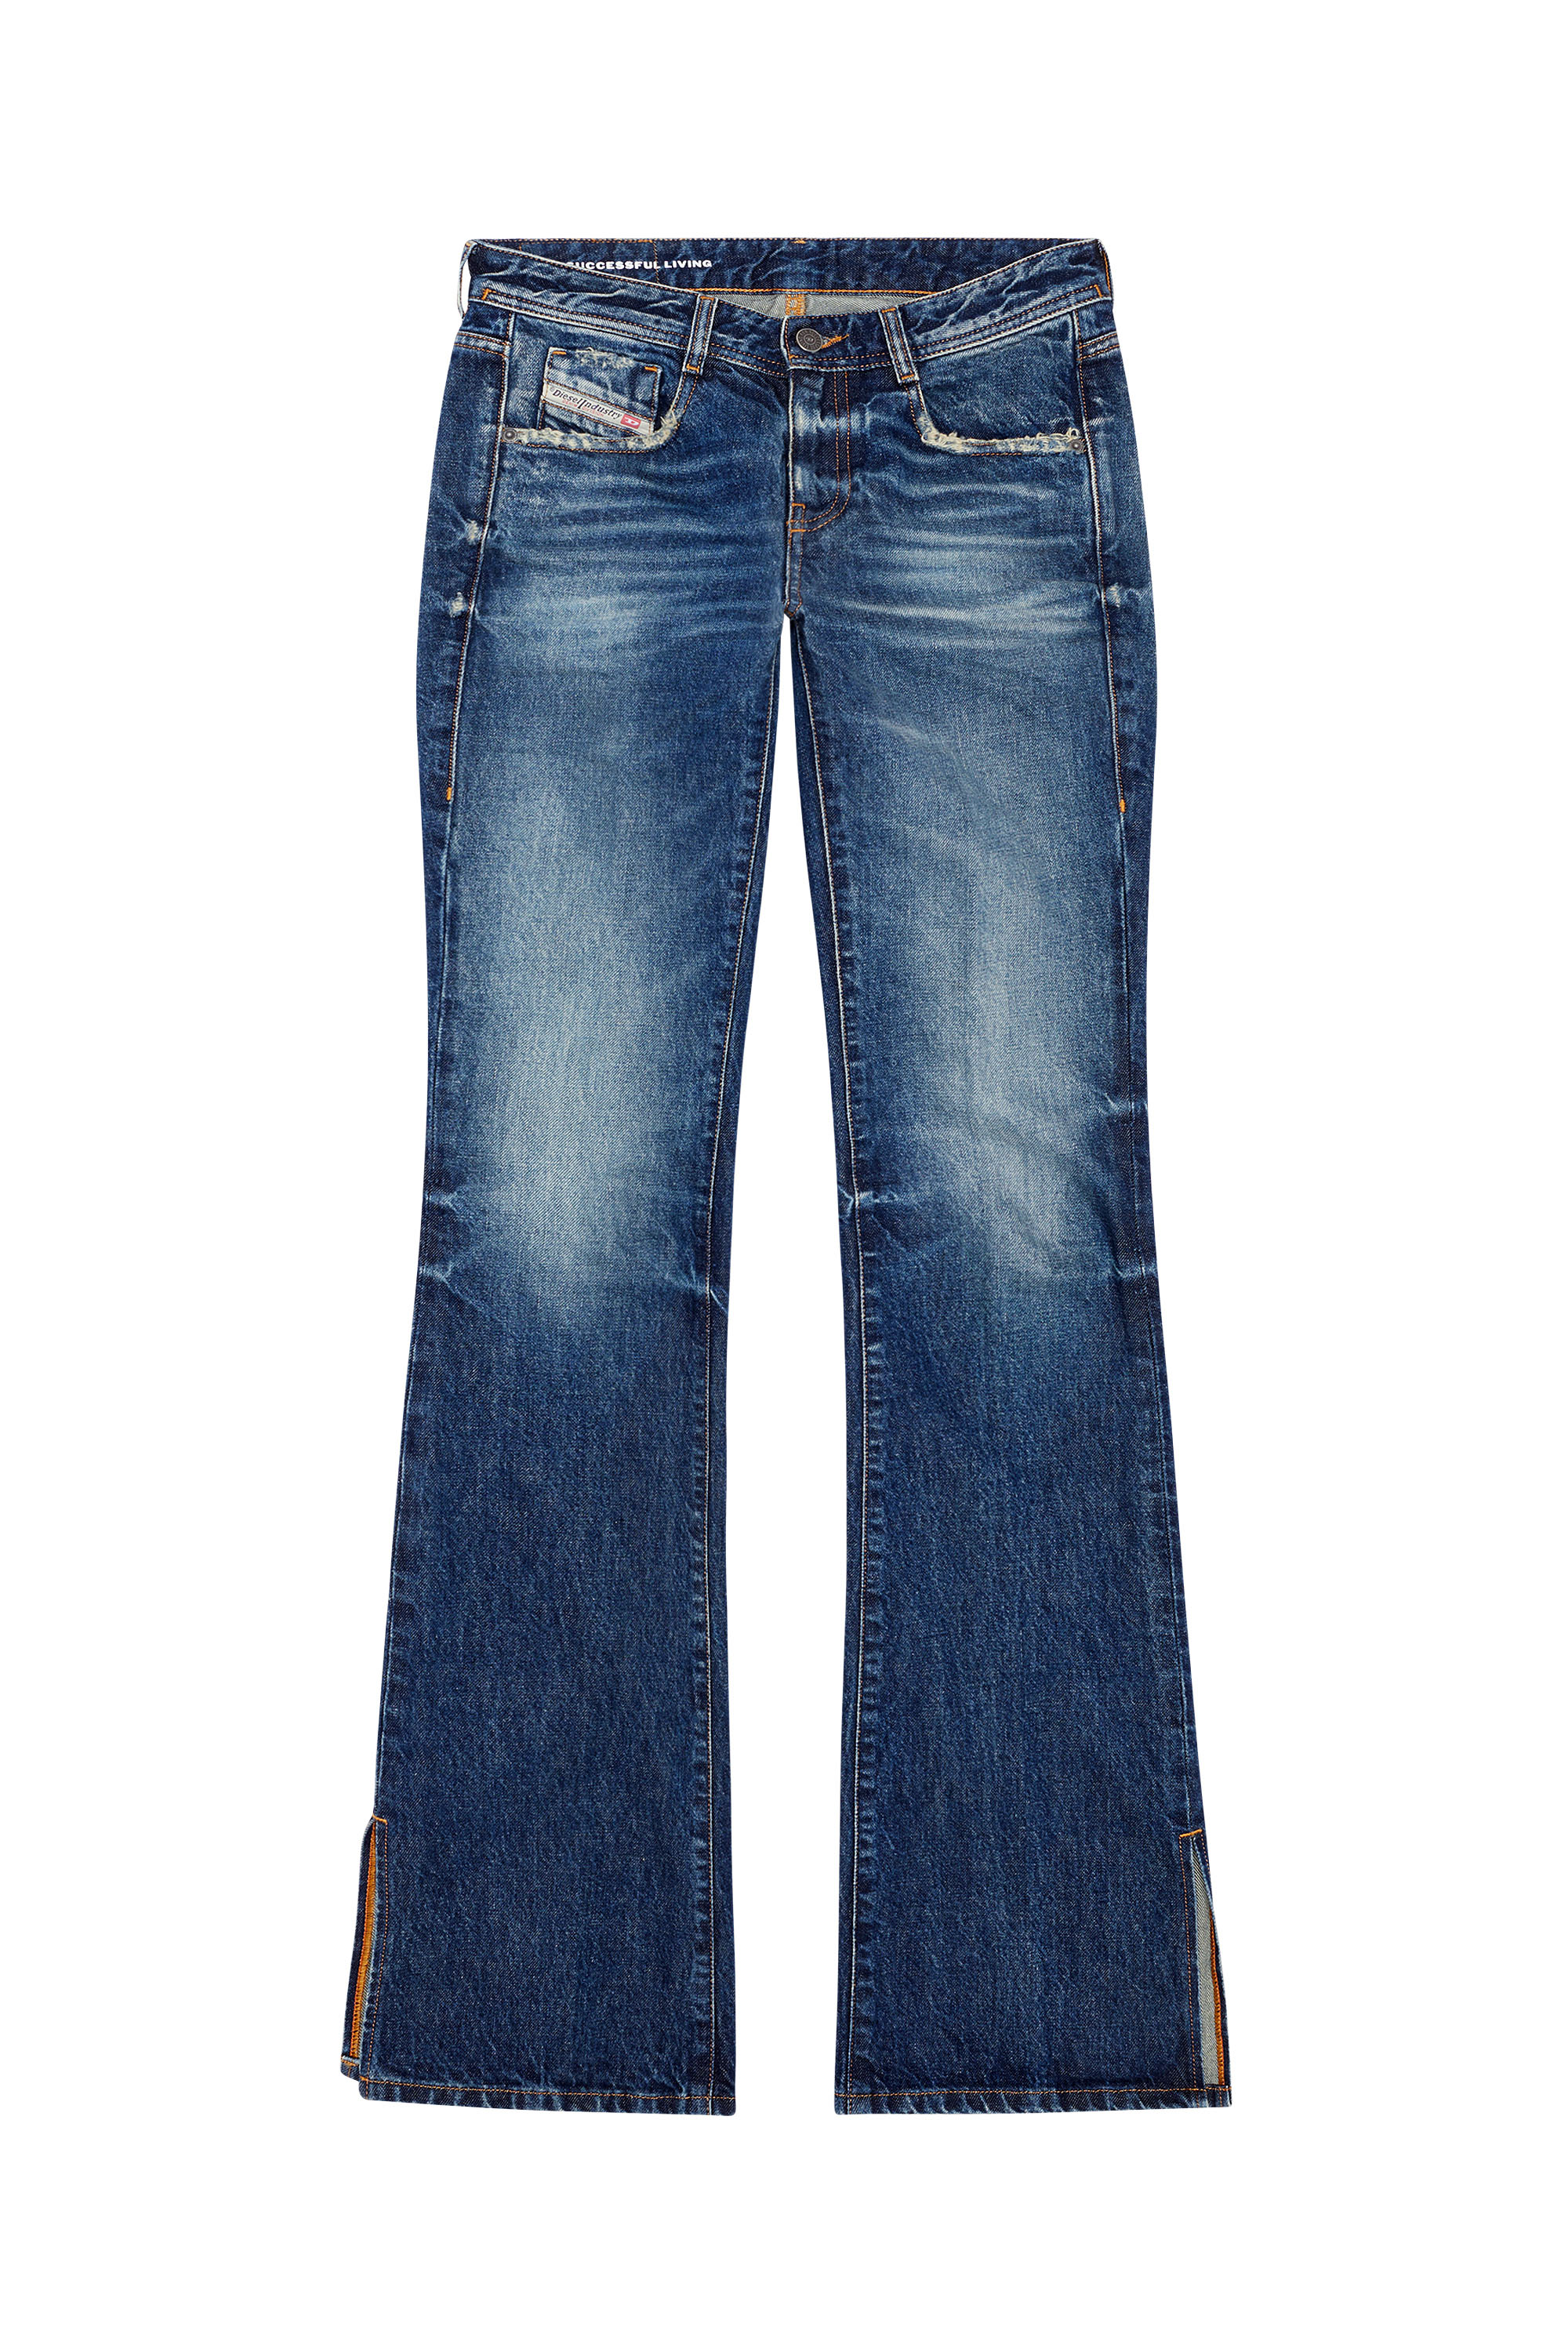 1969 D-Ebbey 09G92 Bootcut and Flare Jeans, 01 - Jeans